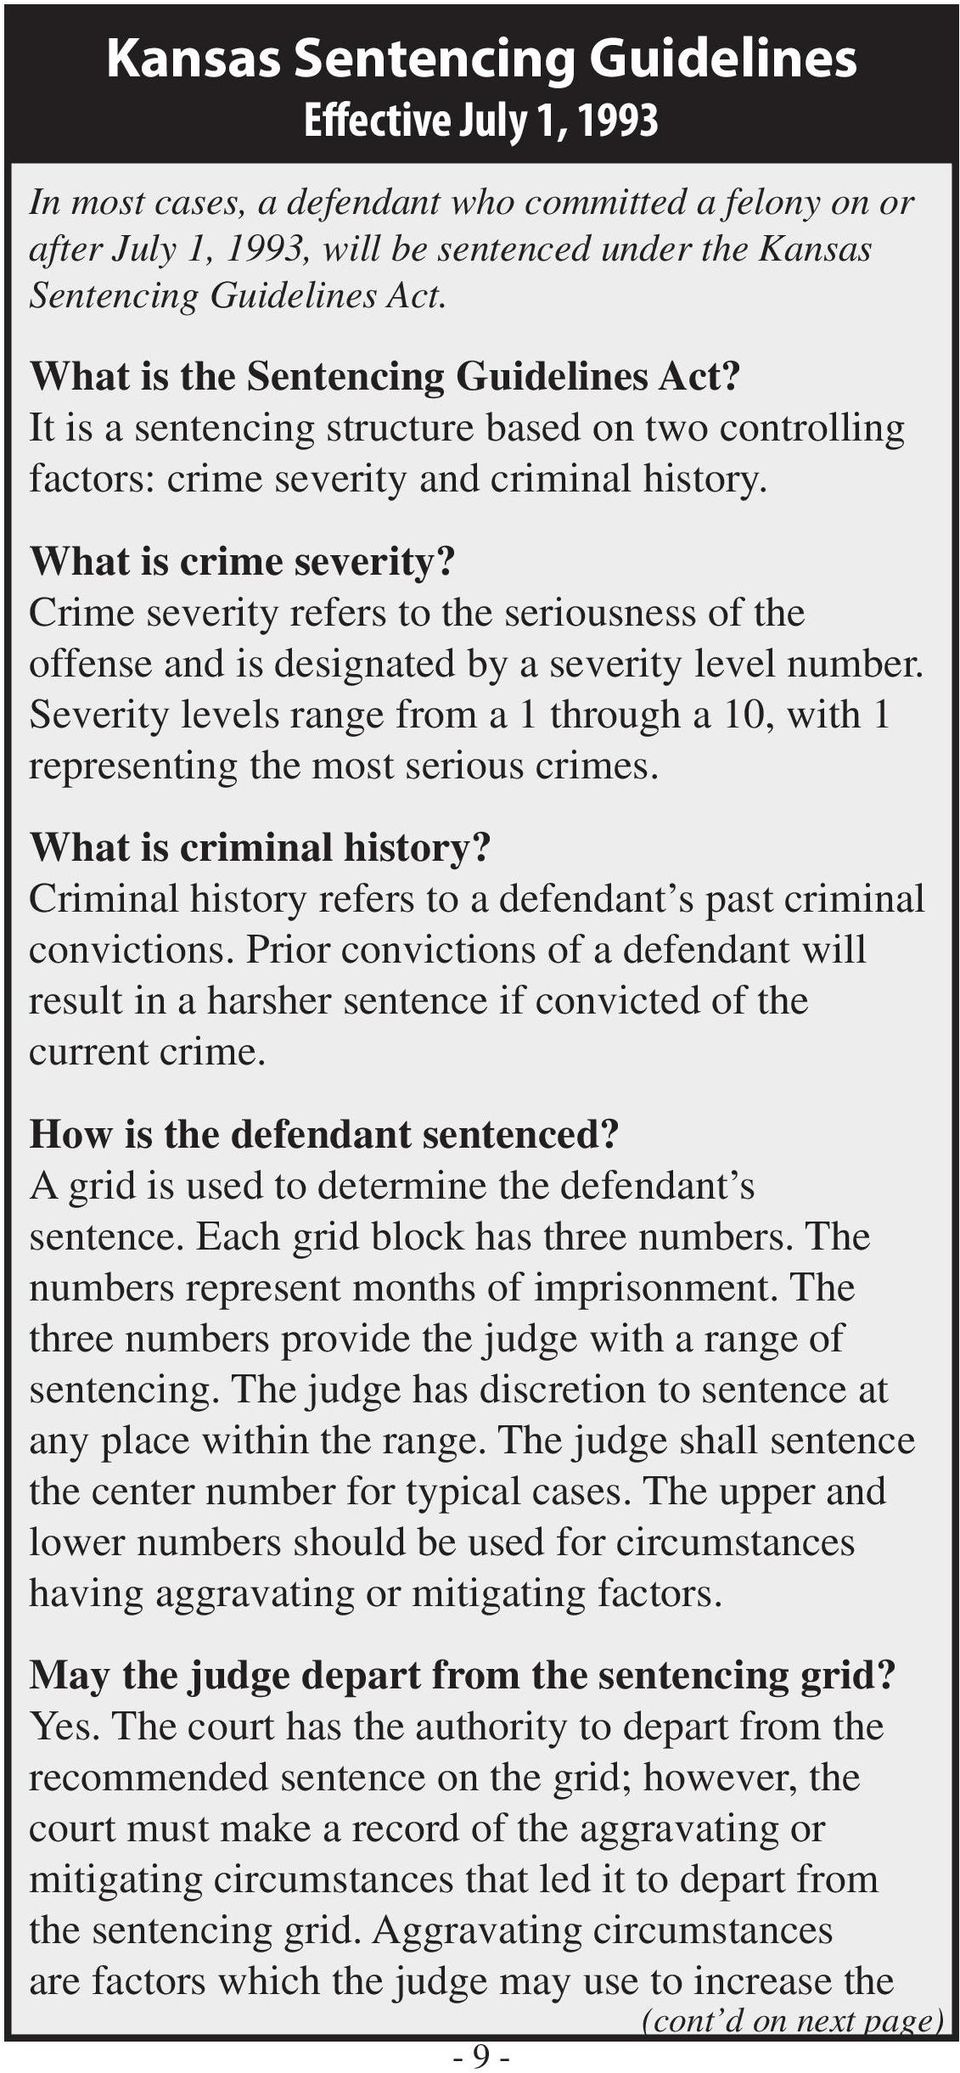 Crime severity refers to the seriousness of the offense and is designated by a severity level number. Severity levels range from a 1 through a 10, with 1 representing the most serious crimes.